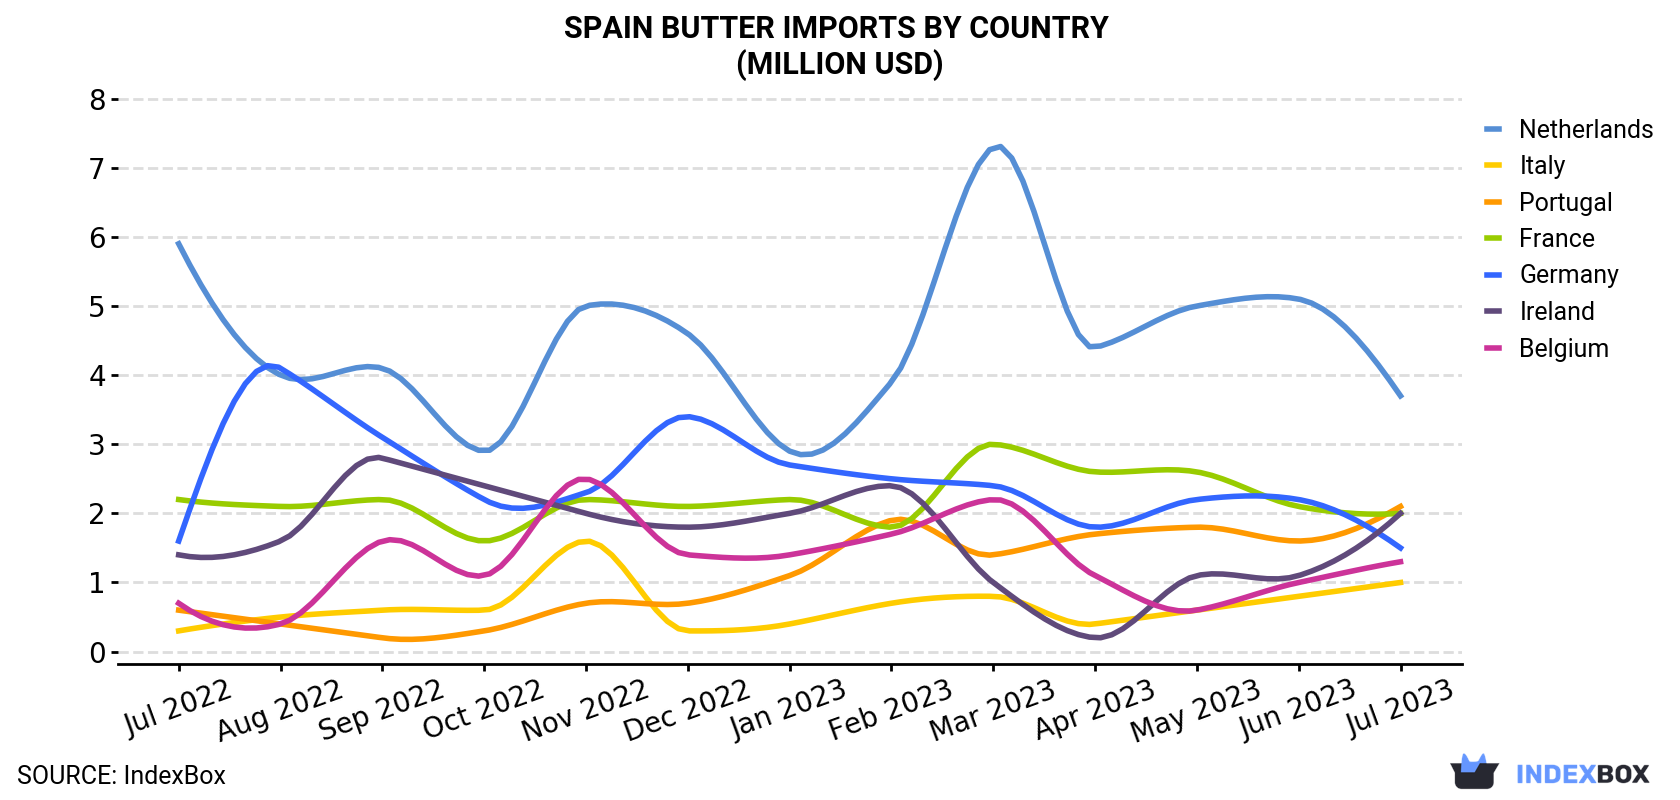 Spain Butter Imports By Country (Million USD)